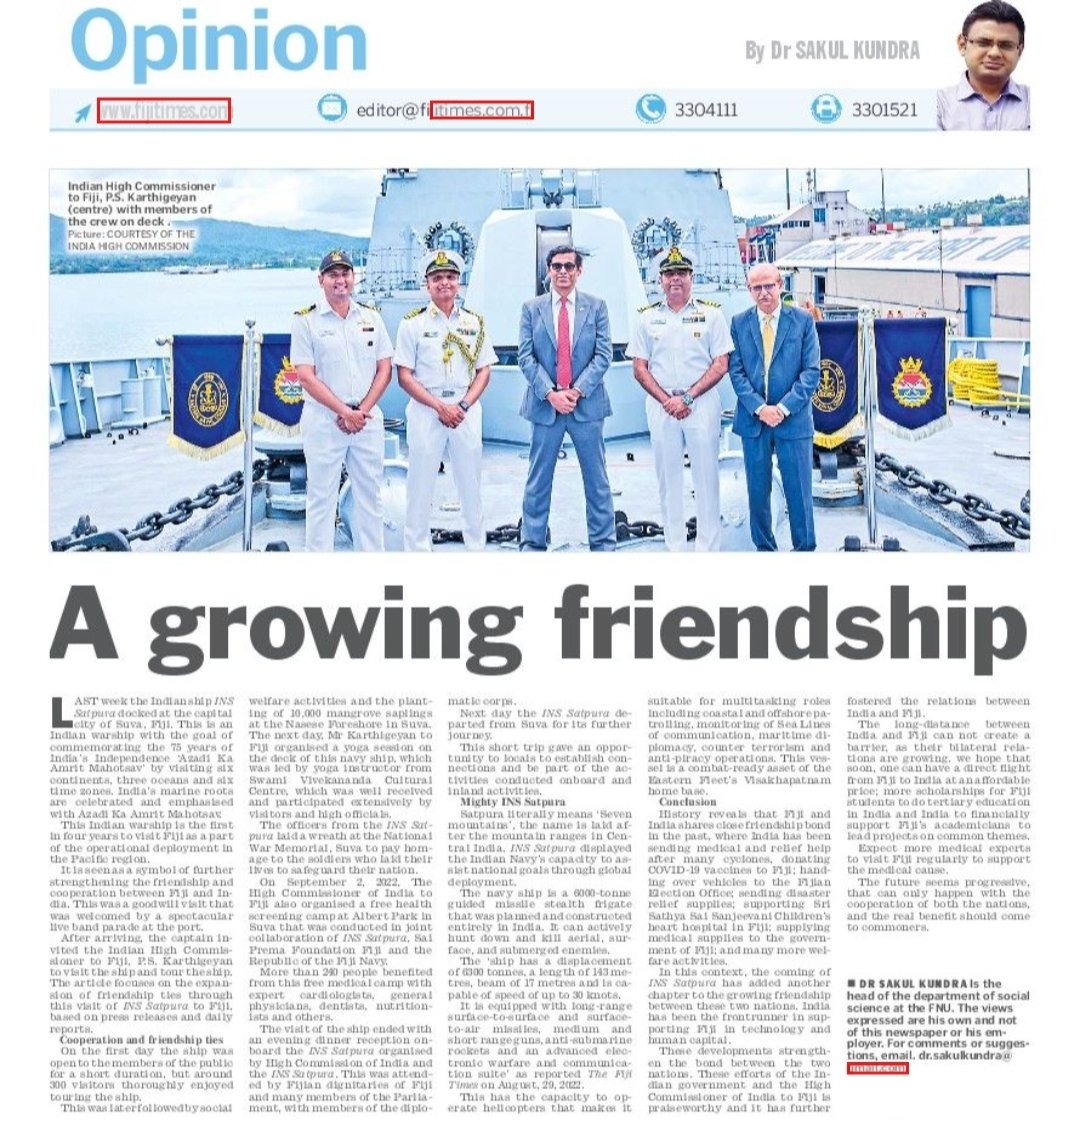 Glad to share my next op-ed A growing Friendship published in #FijiTimes. 
 #HighCommissionofIndia  #fijiindia #azadikaamritmahotsav2022 #AzadiKaAmritMahotsav #saipremafoundation #75yearsofindependence 
INSsatpura in Fiji 

edition.fijitimes.com.fj/infinity/artic…